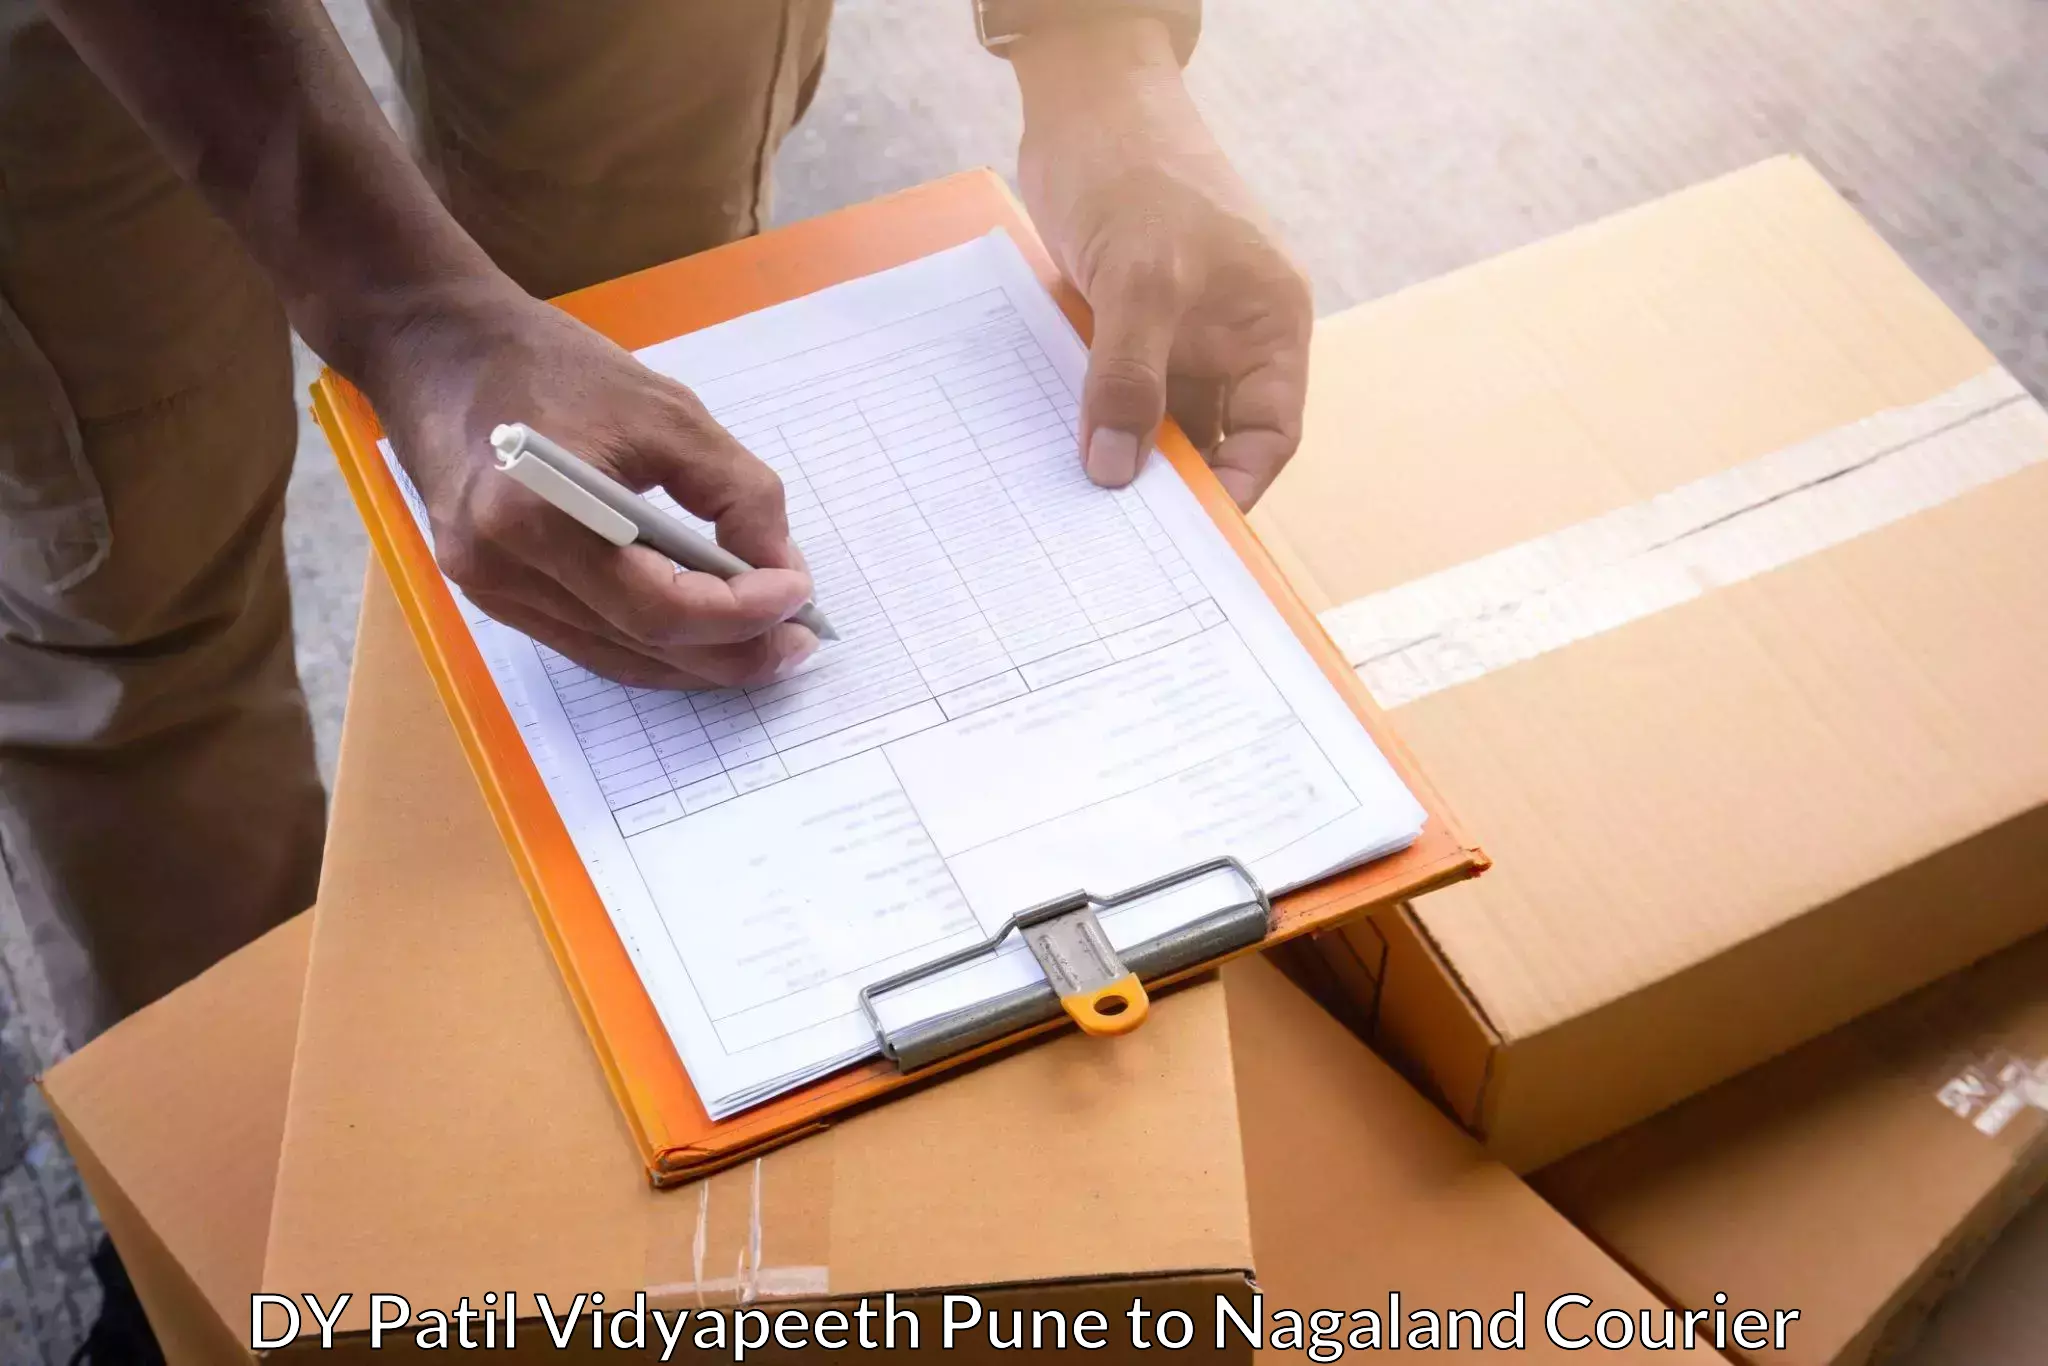 Multi-service courier options DY Patil Vidyapeeth Pune to Nagaland